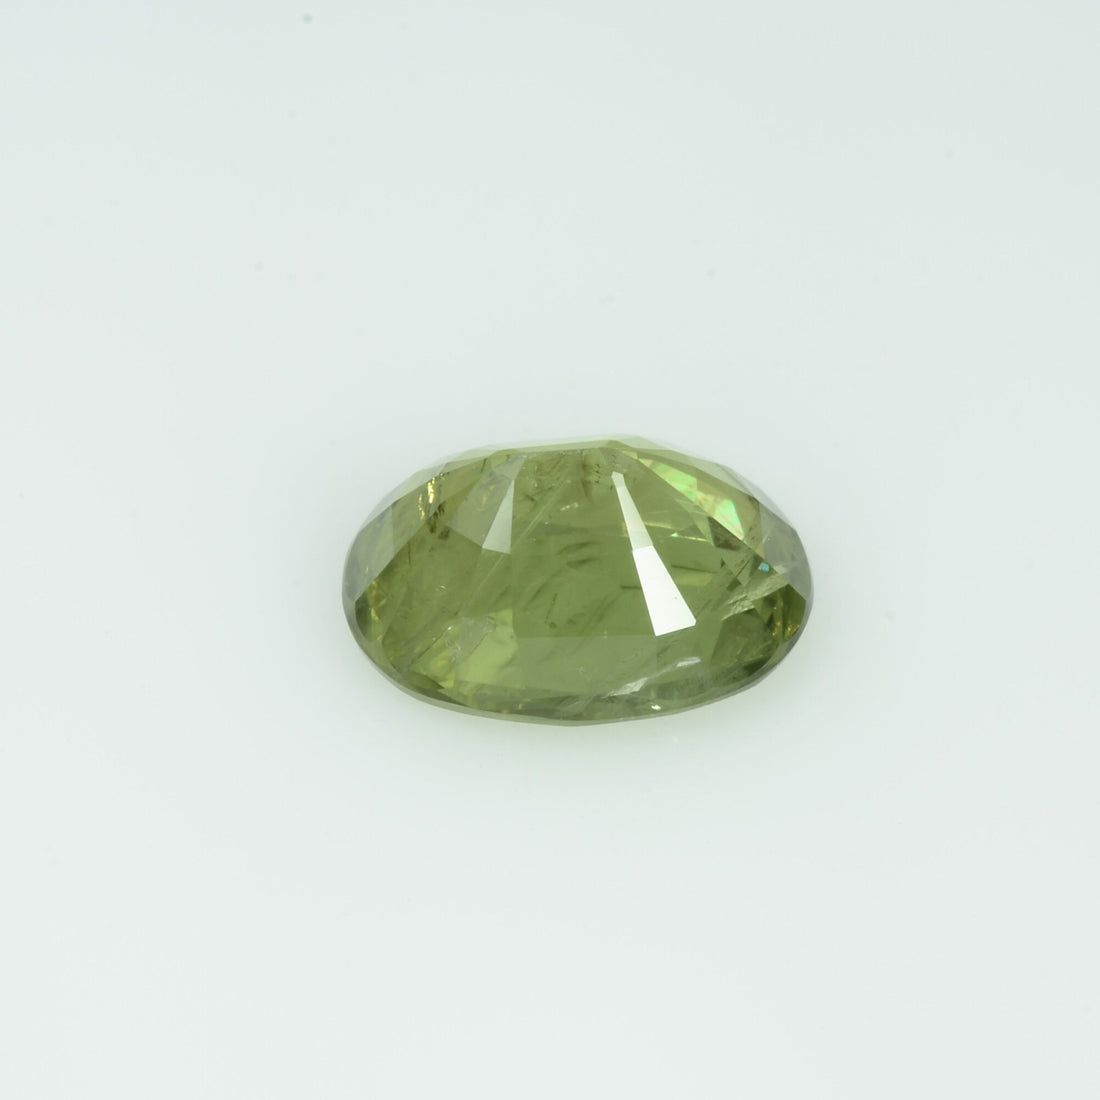 2.36 Cts Natural Green Sapphire Loose Gemstone Oval Cut